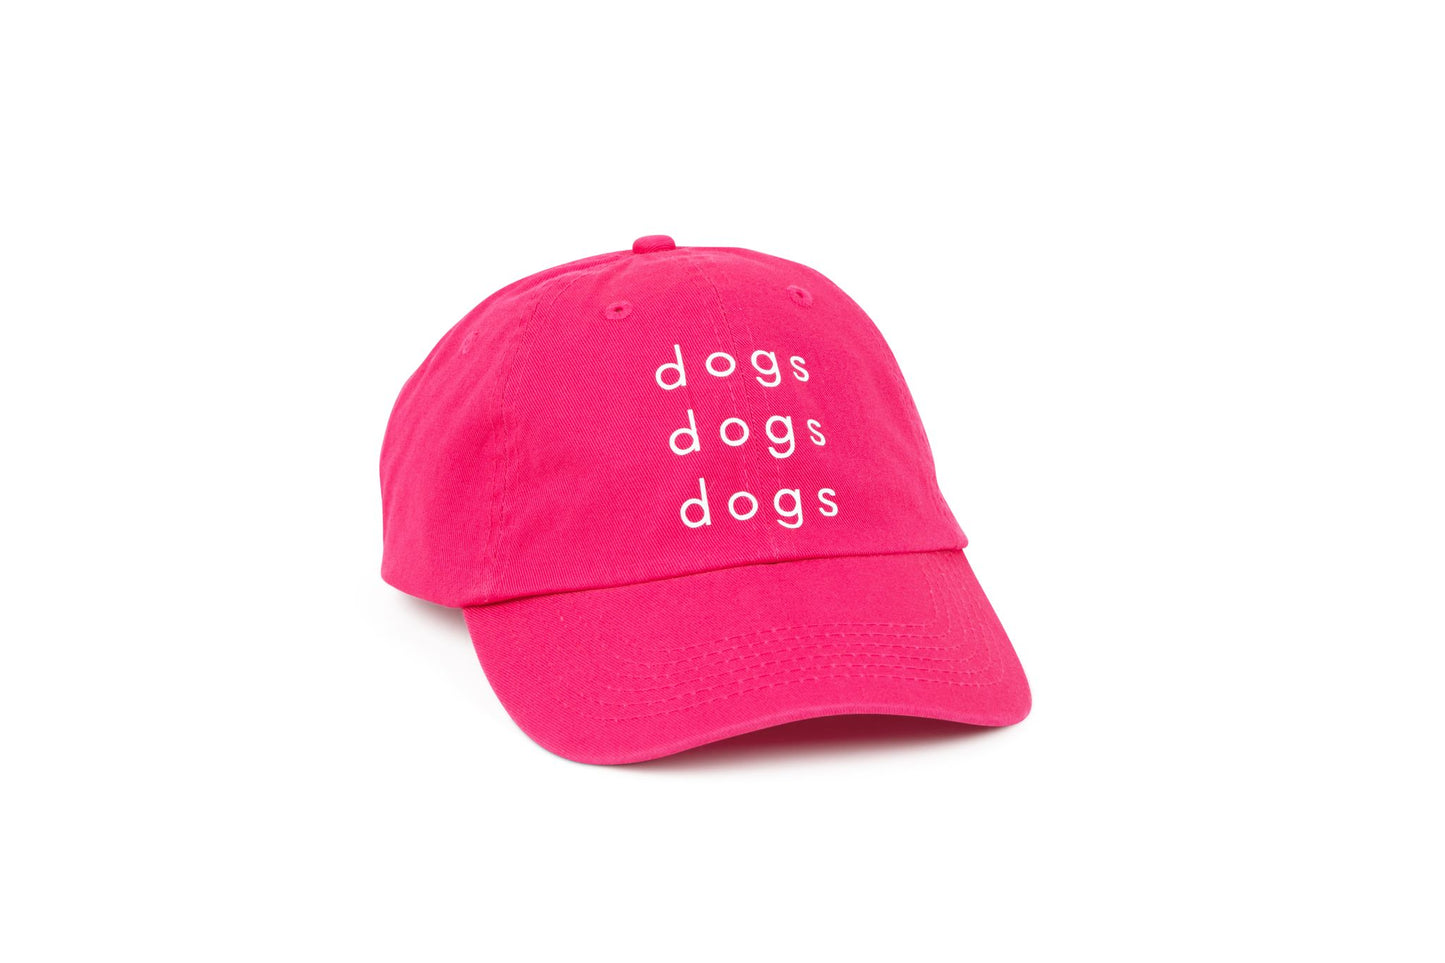 PINK DOGS DOGS DOGS HAT